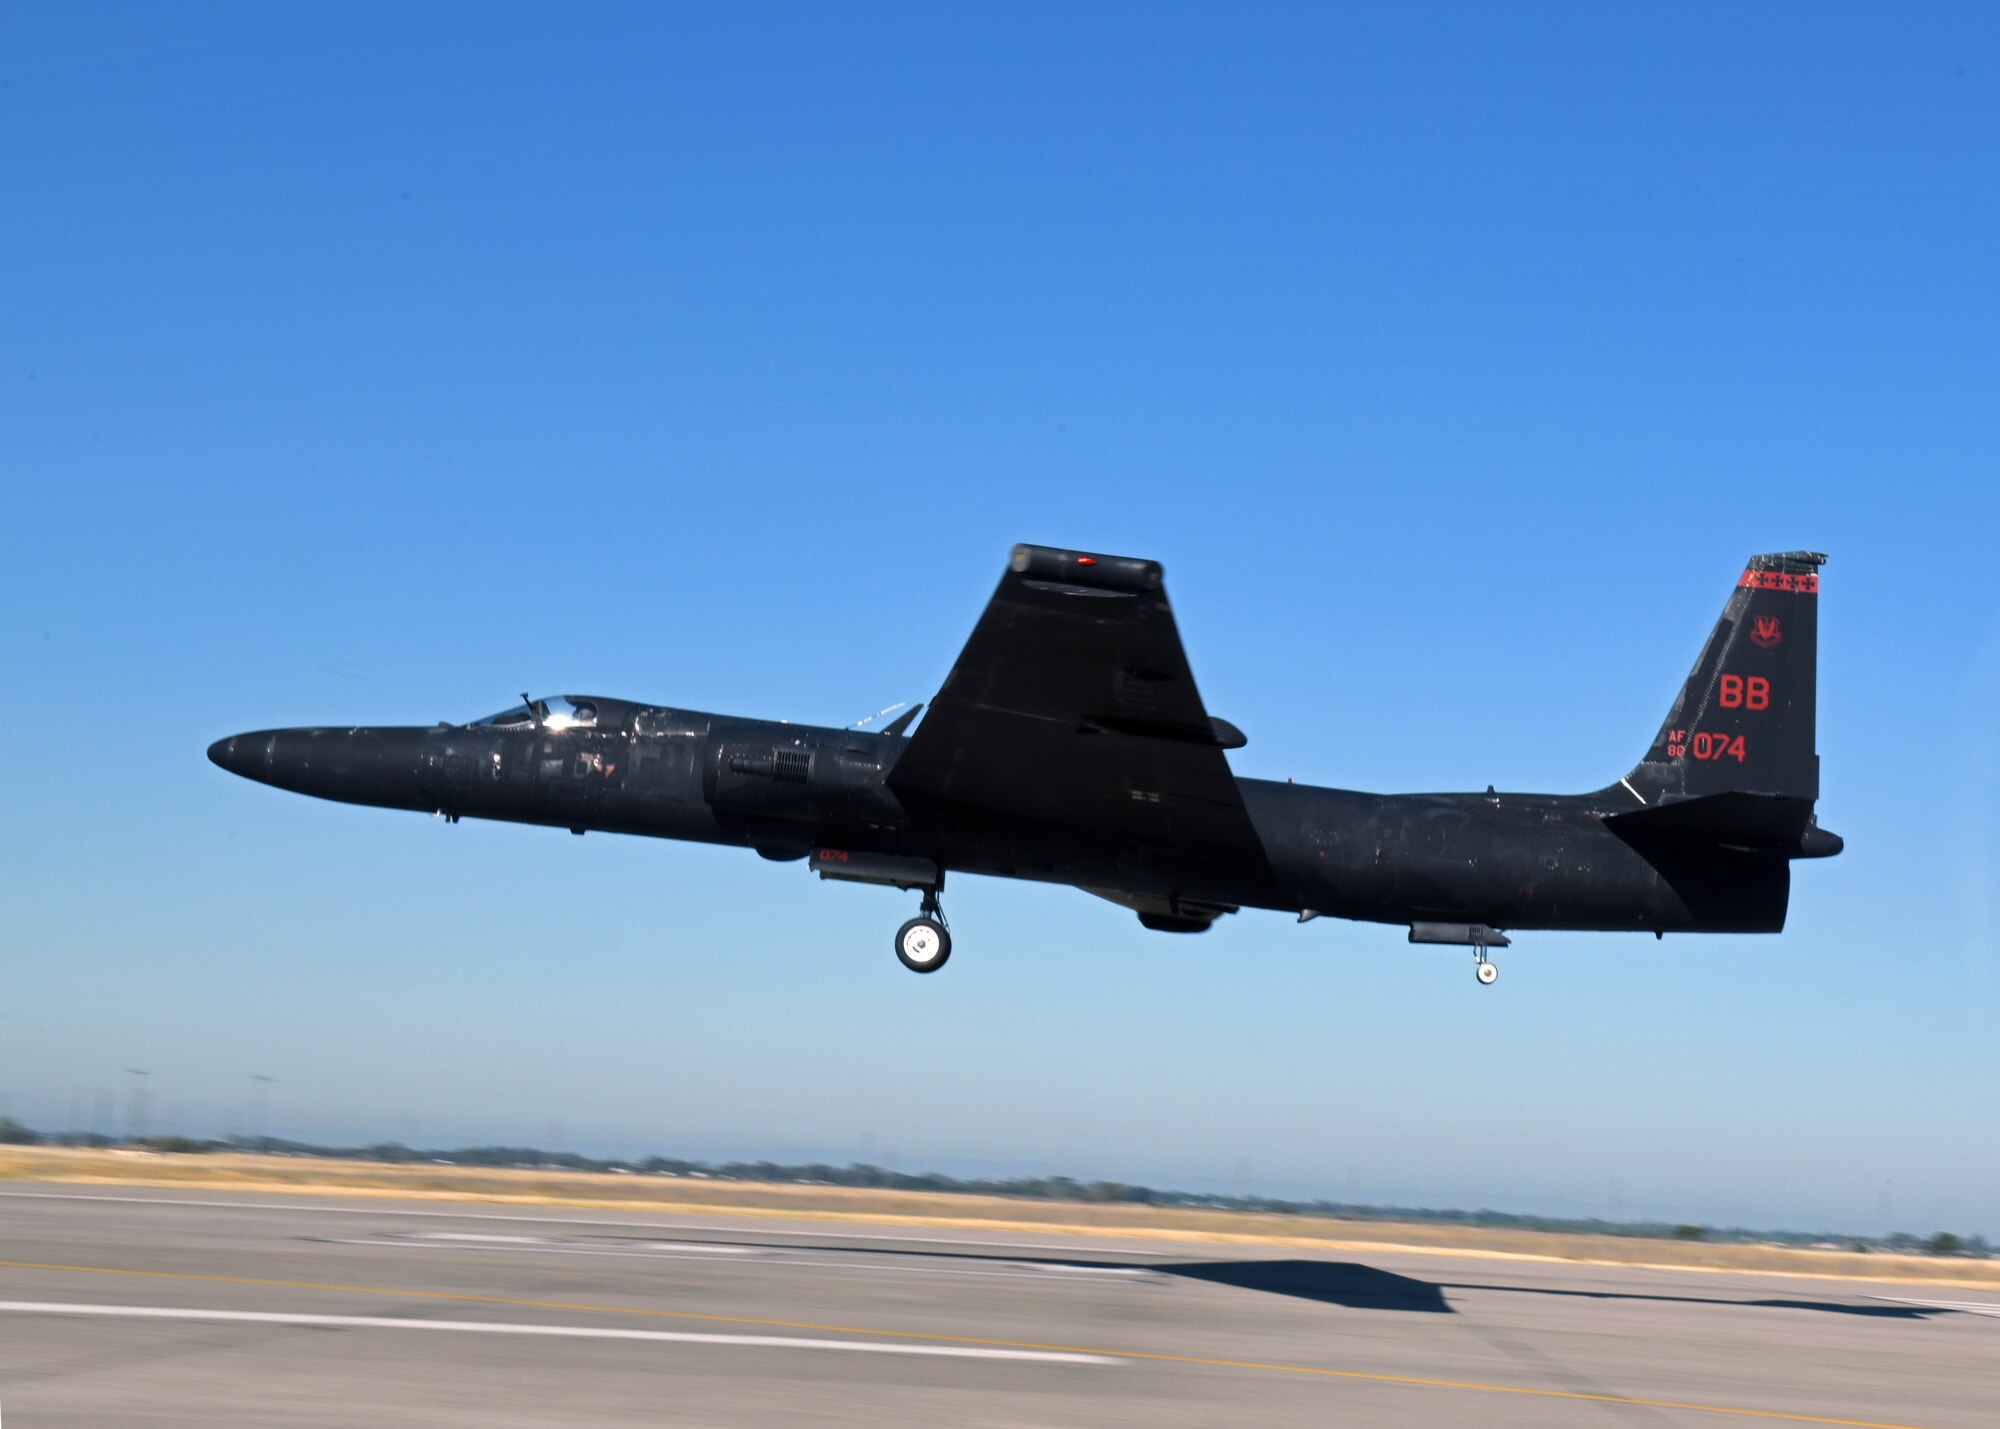 A U-2 Dragon Lady piloted by retired Lt. Col. Jonathan Huggins, 1st Reconnaissance Squadron U-2 instructor pilot, prepares for landing July 31, 2020 at Beale Air Force Base, California. The bicycle-type landing gear and low-altitude handling characteristics of the U-2 require precise control inputs during landing. (U.S. Air Force photo by Airman 1st Class Luis A. Ruiz-Vazquez)